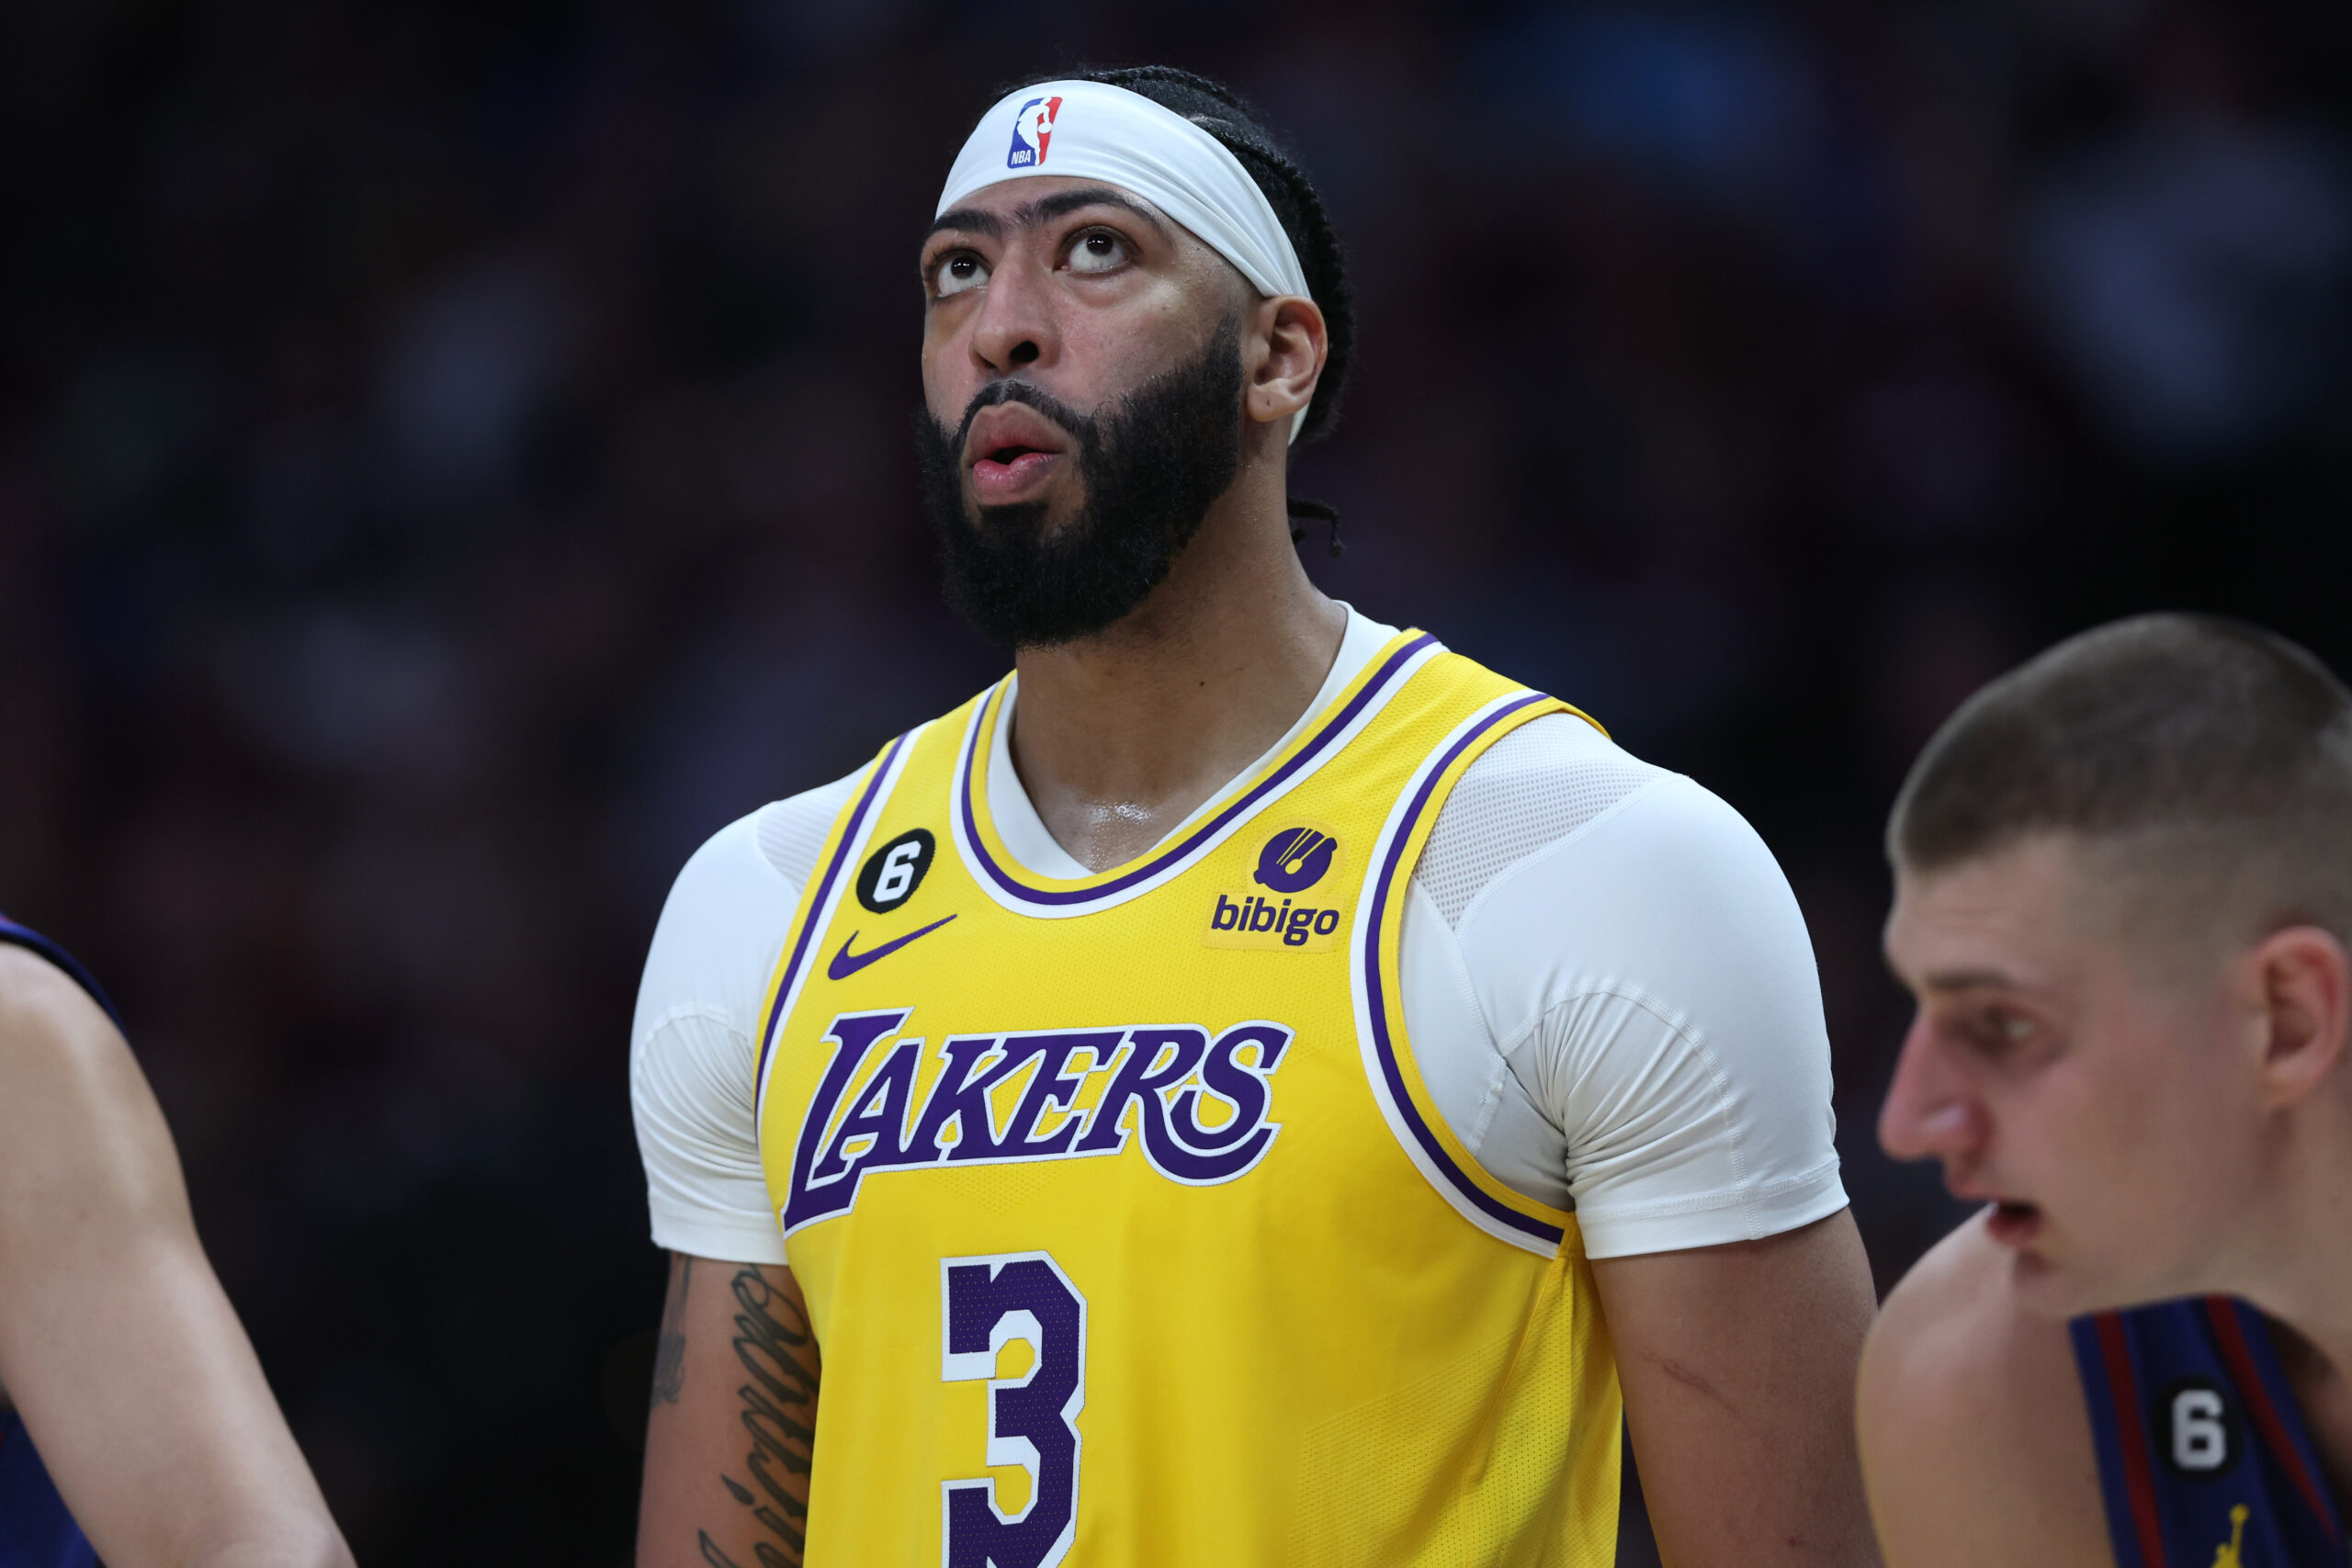 Anthony Davis' Net Worth: The Brow Dunked His Way to Millions - FanBuzz